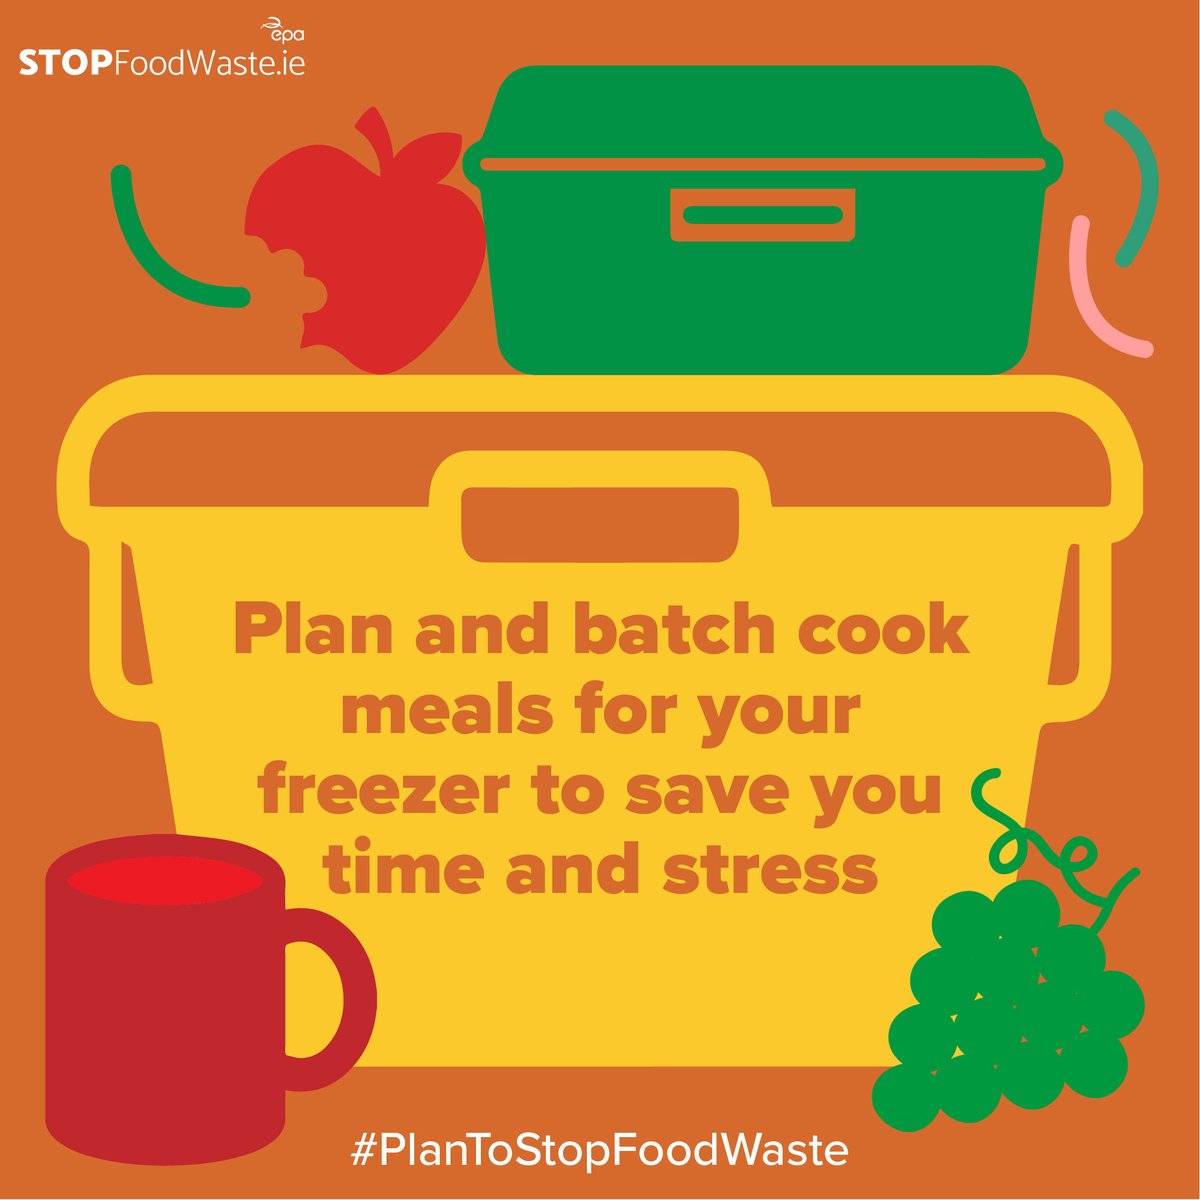 By batch cooking, you can create freezer food treasure for a future meal to save you time and money. 

Find more tips on how to make the most of the food in your freezer at: stopfoodwaste.ie/shopping-and-s…

#PlanToStopFoodWaste